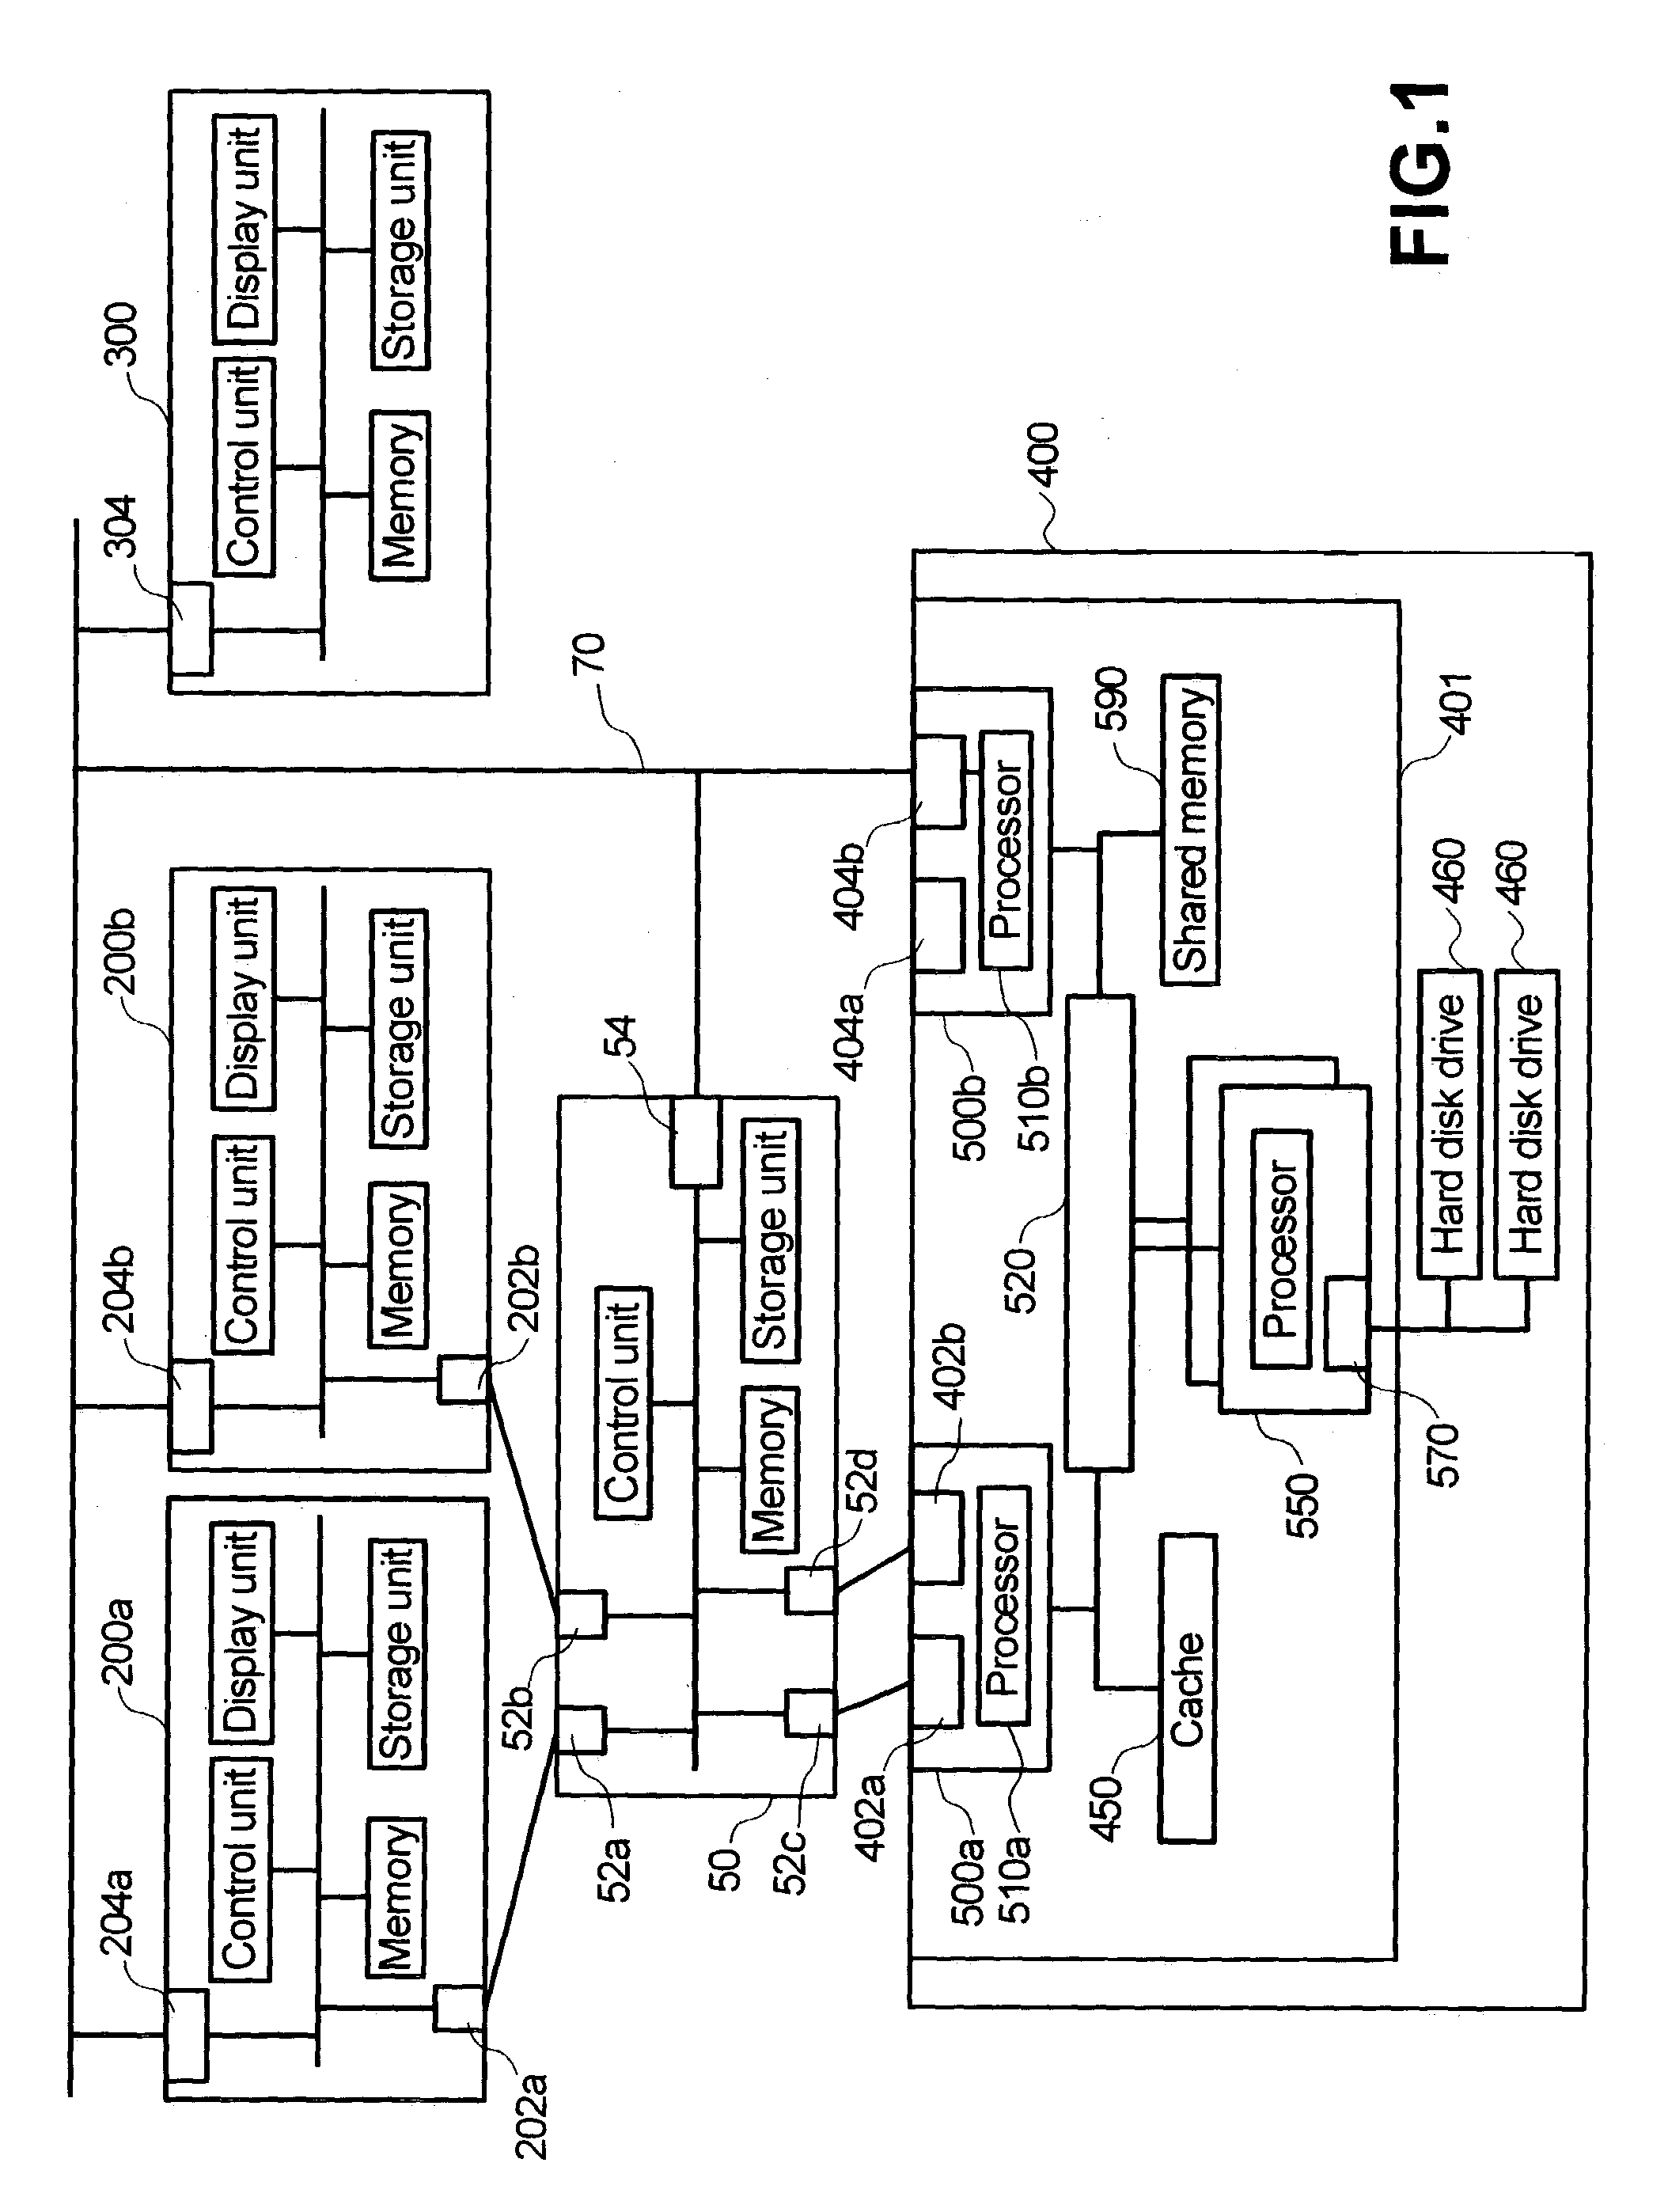 Command processing system by a management agent